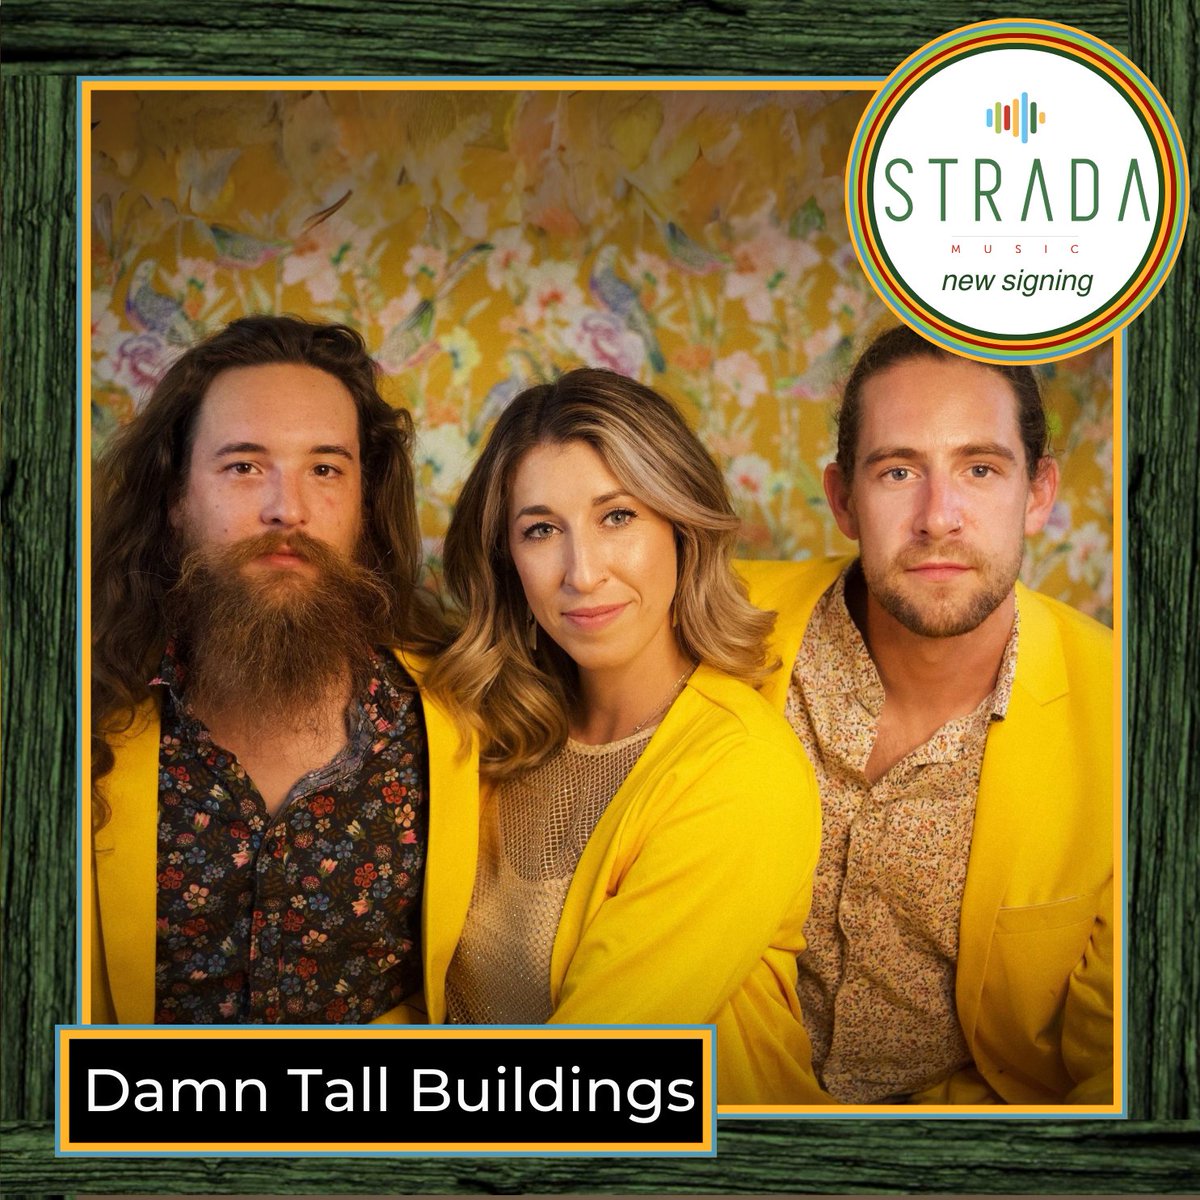 📣NEW SIGNING Damn Tall Buildings 🎊 @DamnTallTweets We are very proud to welcome Damn Tall Buildings to our roster, working with agent Rob Heron and can’t wait to get their show on the road🚐. Read Read More | Bookings ↙ stradamusic.com/artist/damn-ta… #DamnTallBuildings